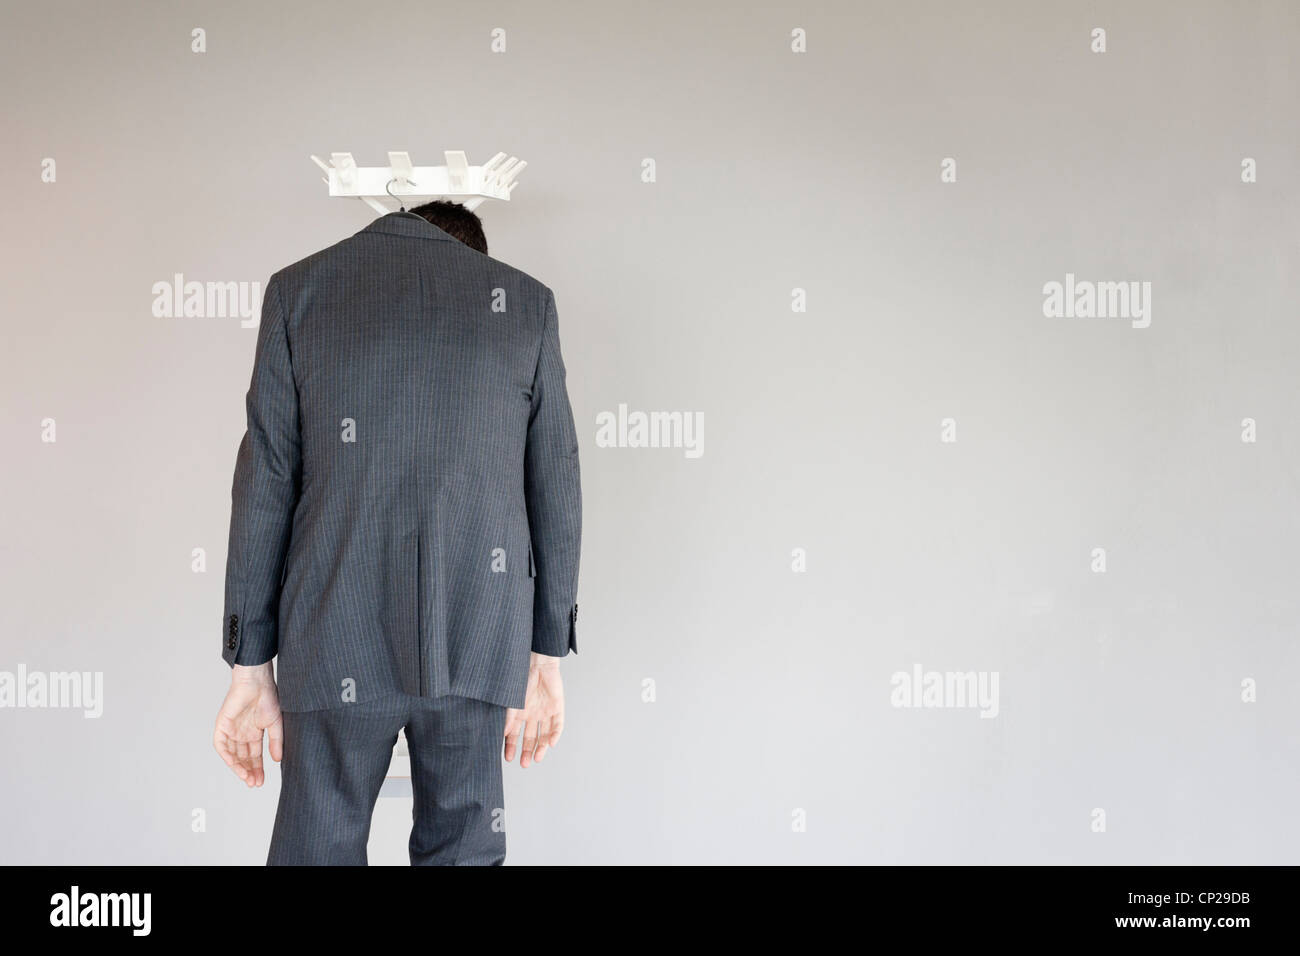 Unemployed business man left behind on a coat hanger (model released) Stock Photo